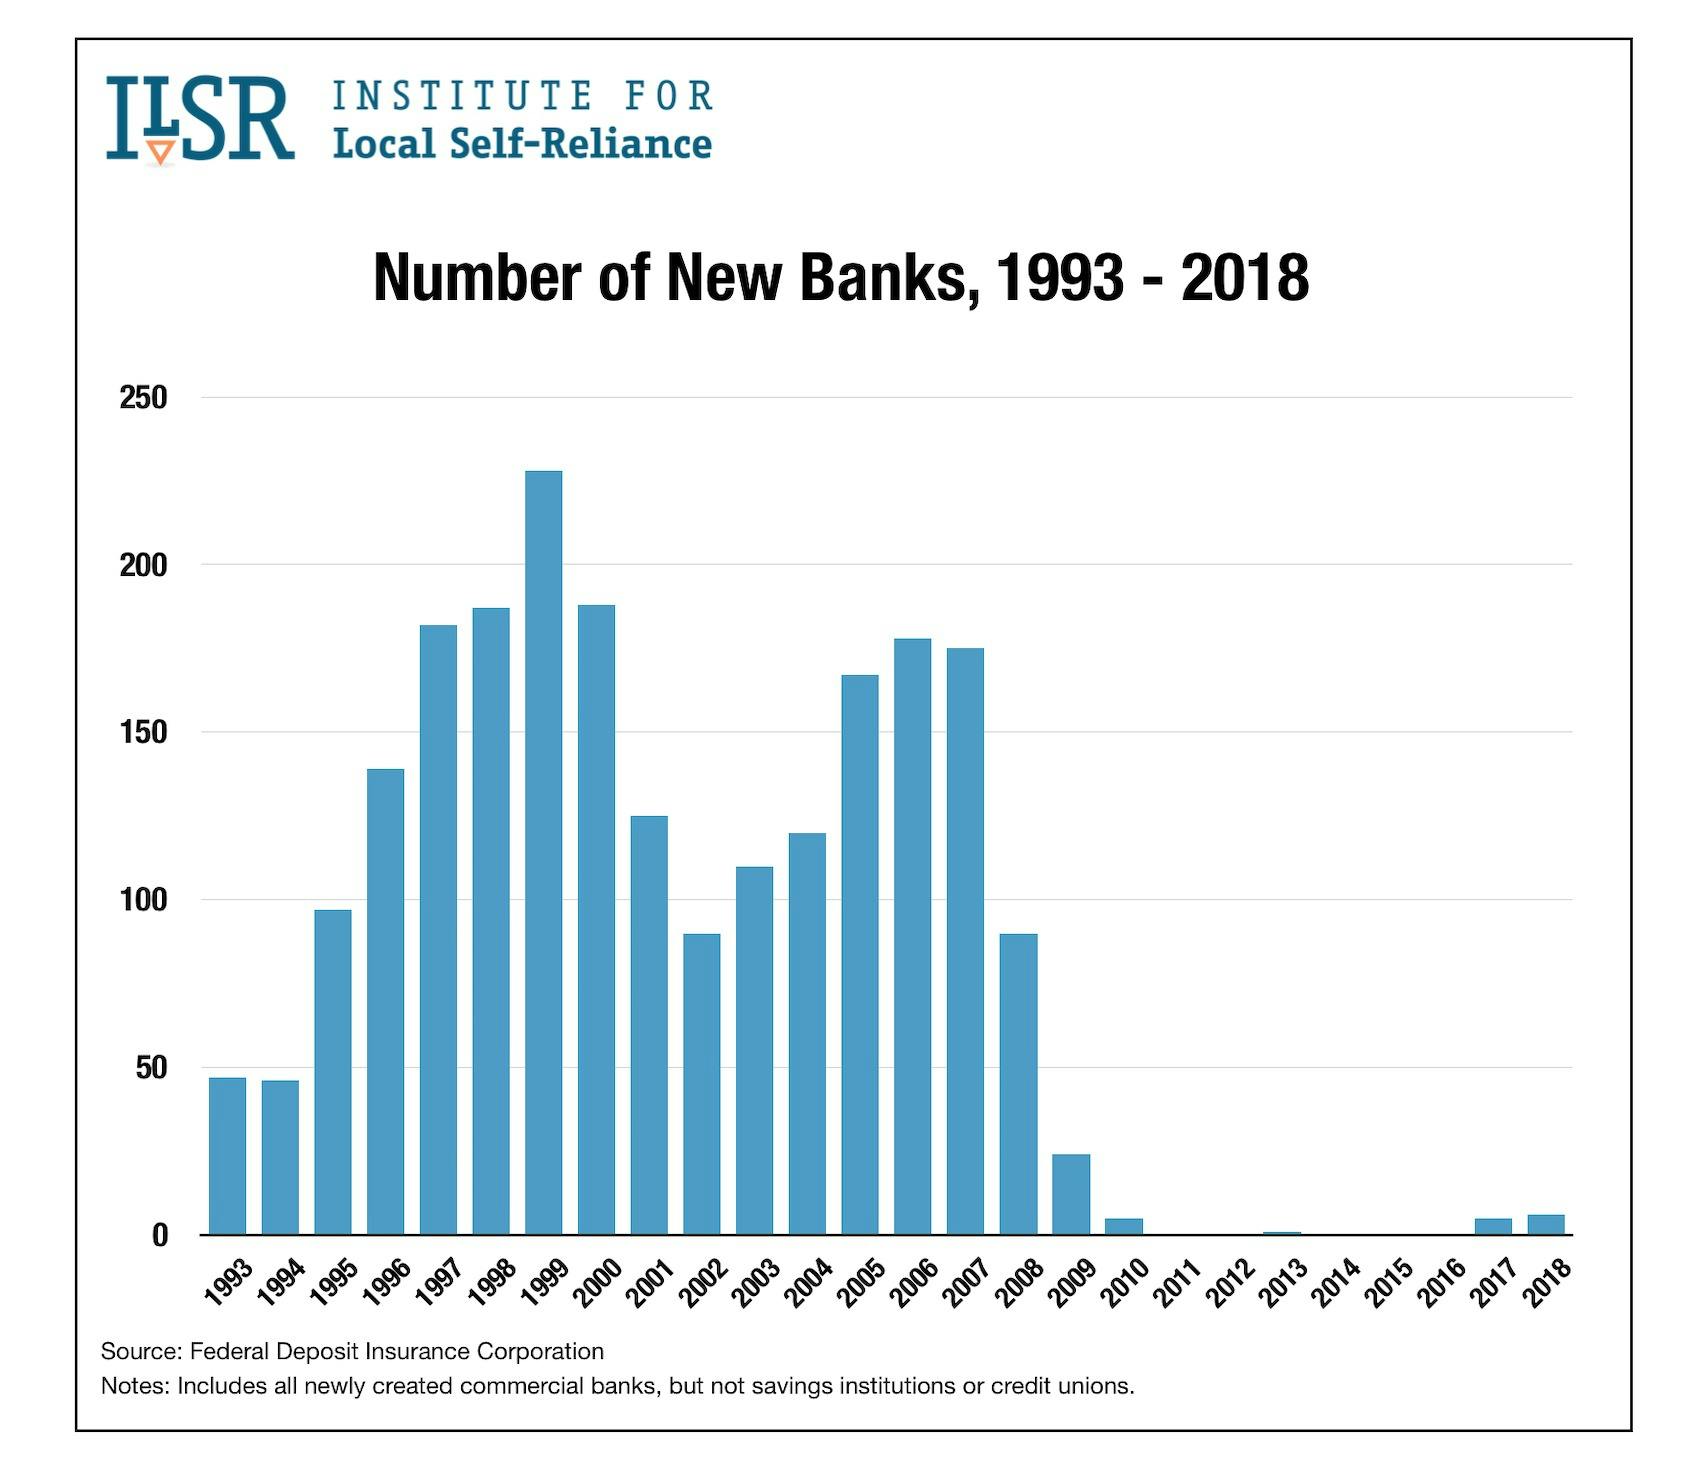 Innovation in banking—a key part of capital formation—has fallen off completely. Source: Graphic (https://ilsr.org/tag/new-bank-creation/) by the Federal Deposit Insurance Corporation published on the Institute for Local Self-Reliance website, used under a fair use rationale.